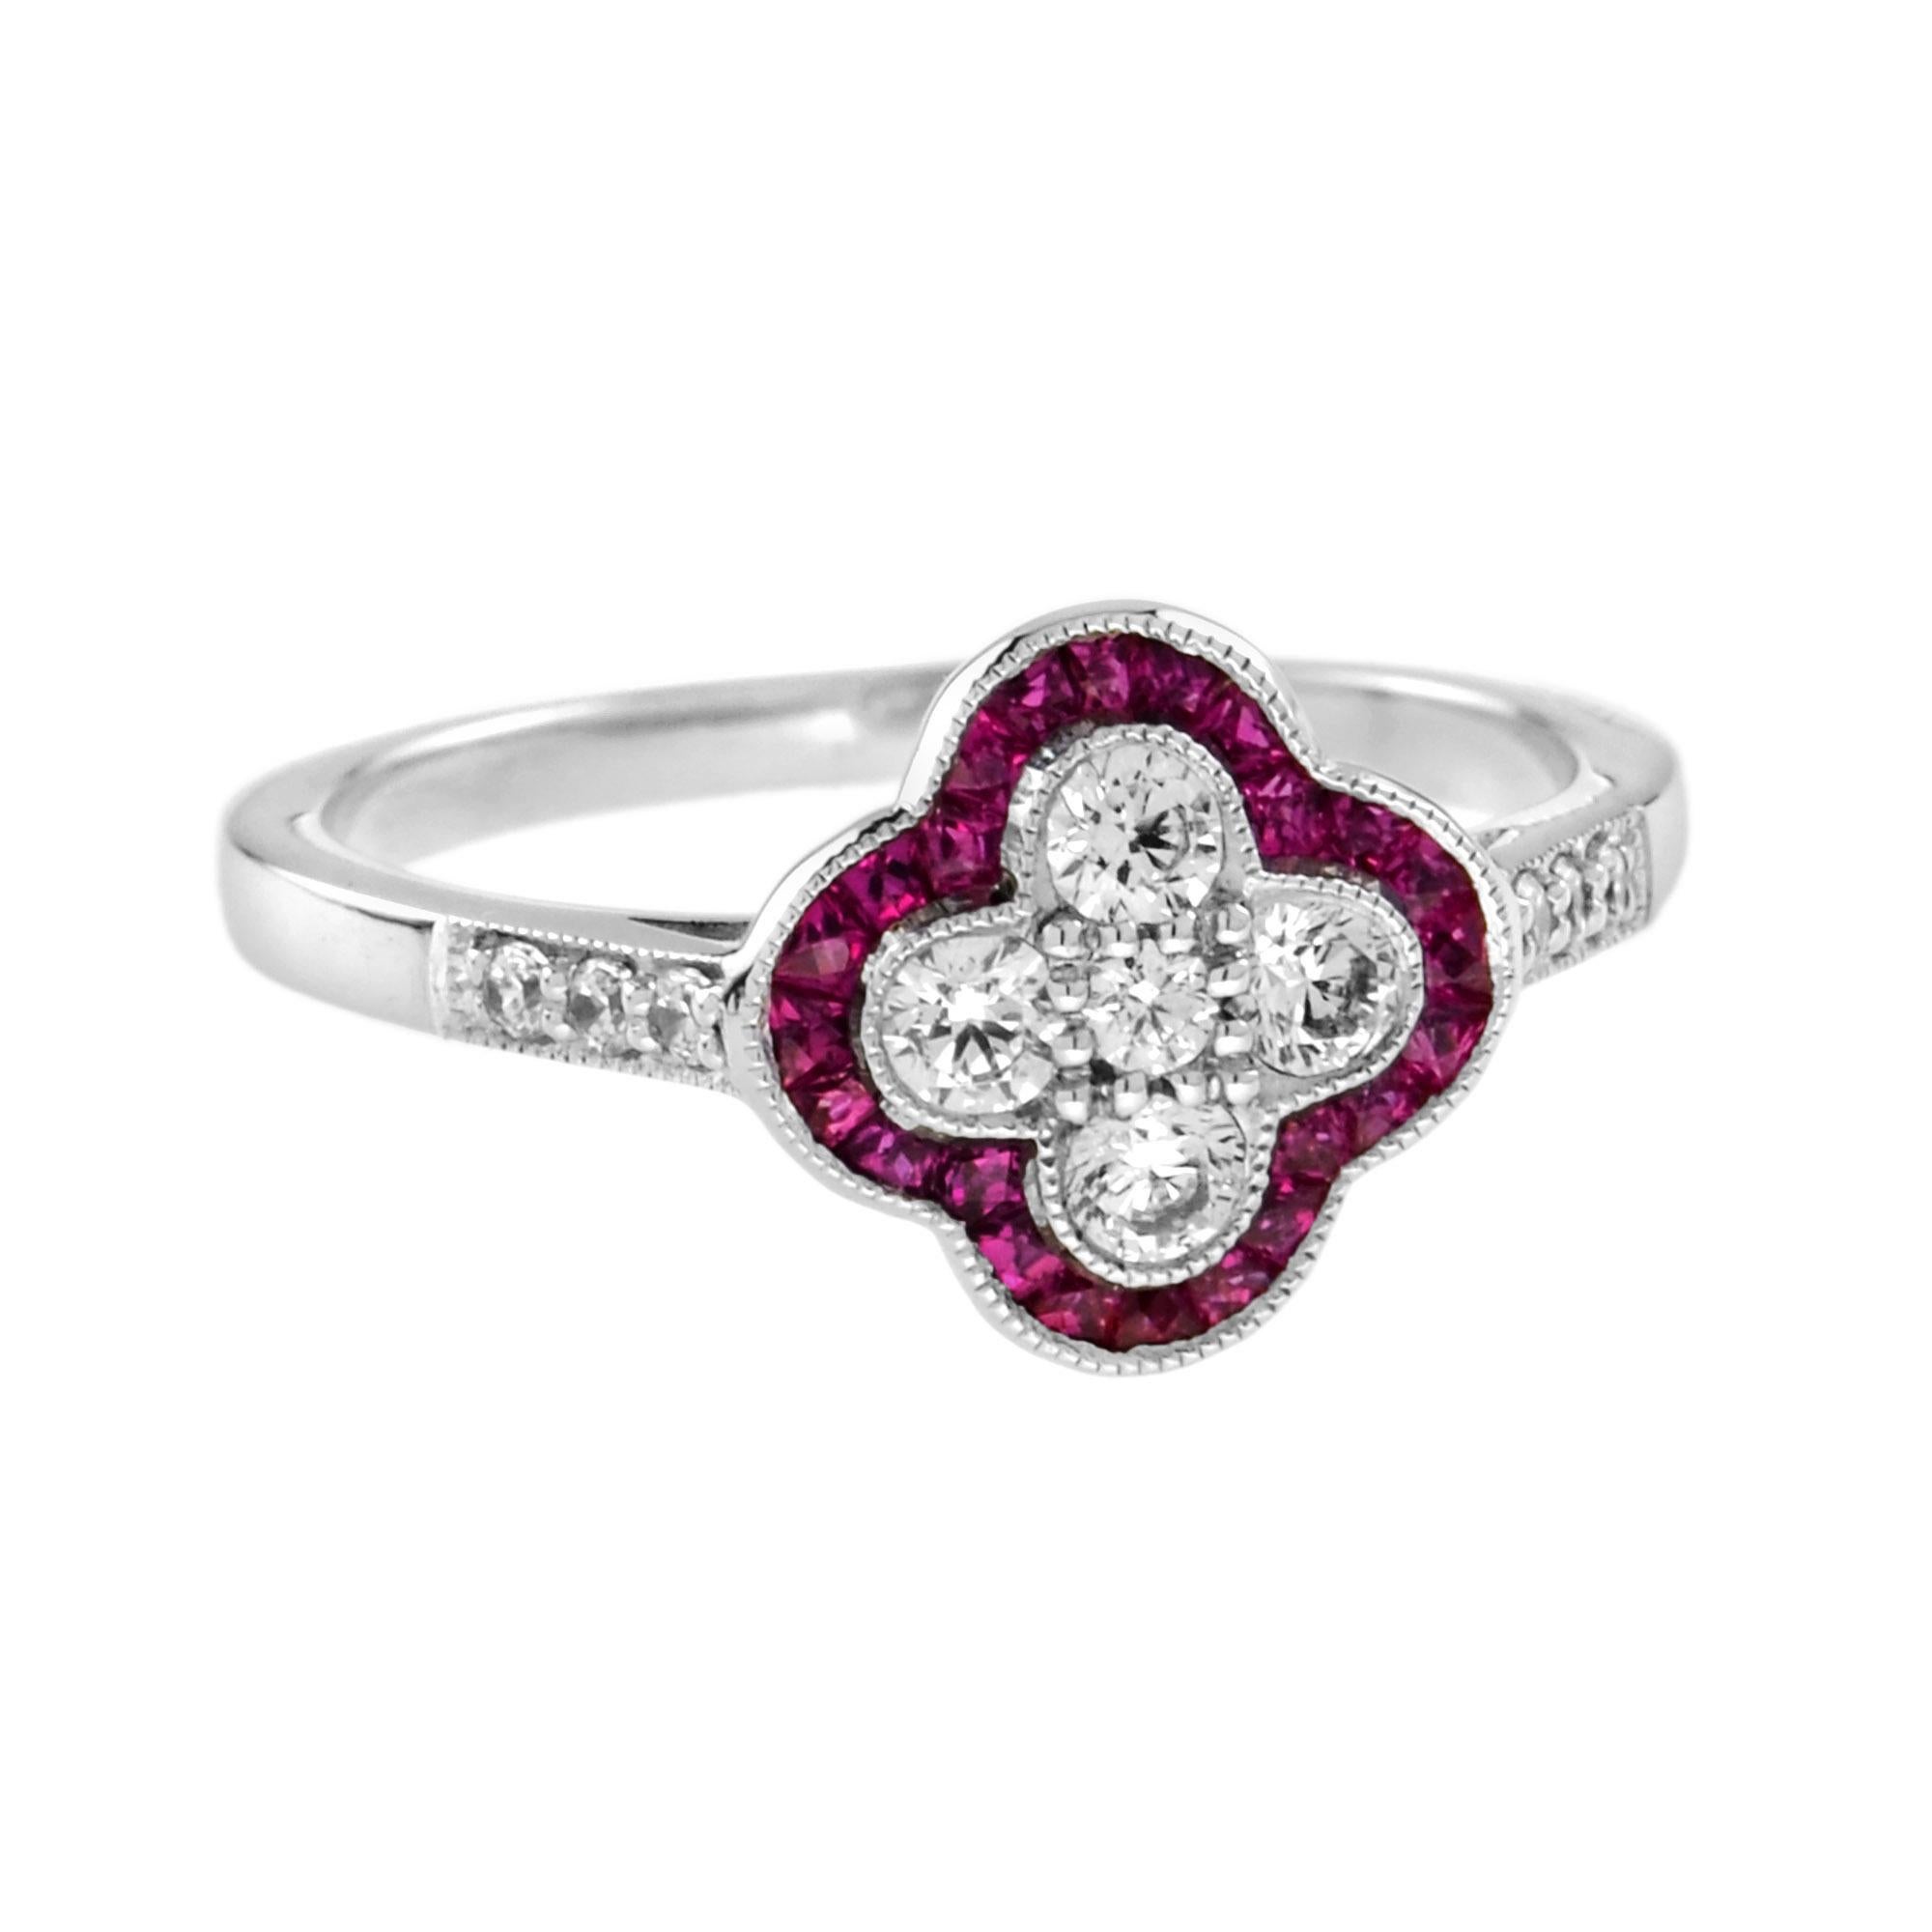 For Sale:  Diamond and Ruby Art Deco Style Floral Cluster Ring in 18K White Gold 2